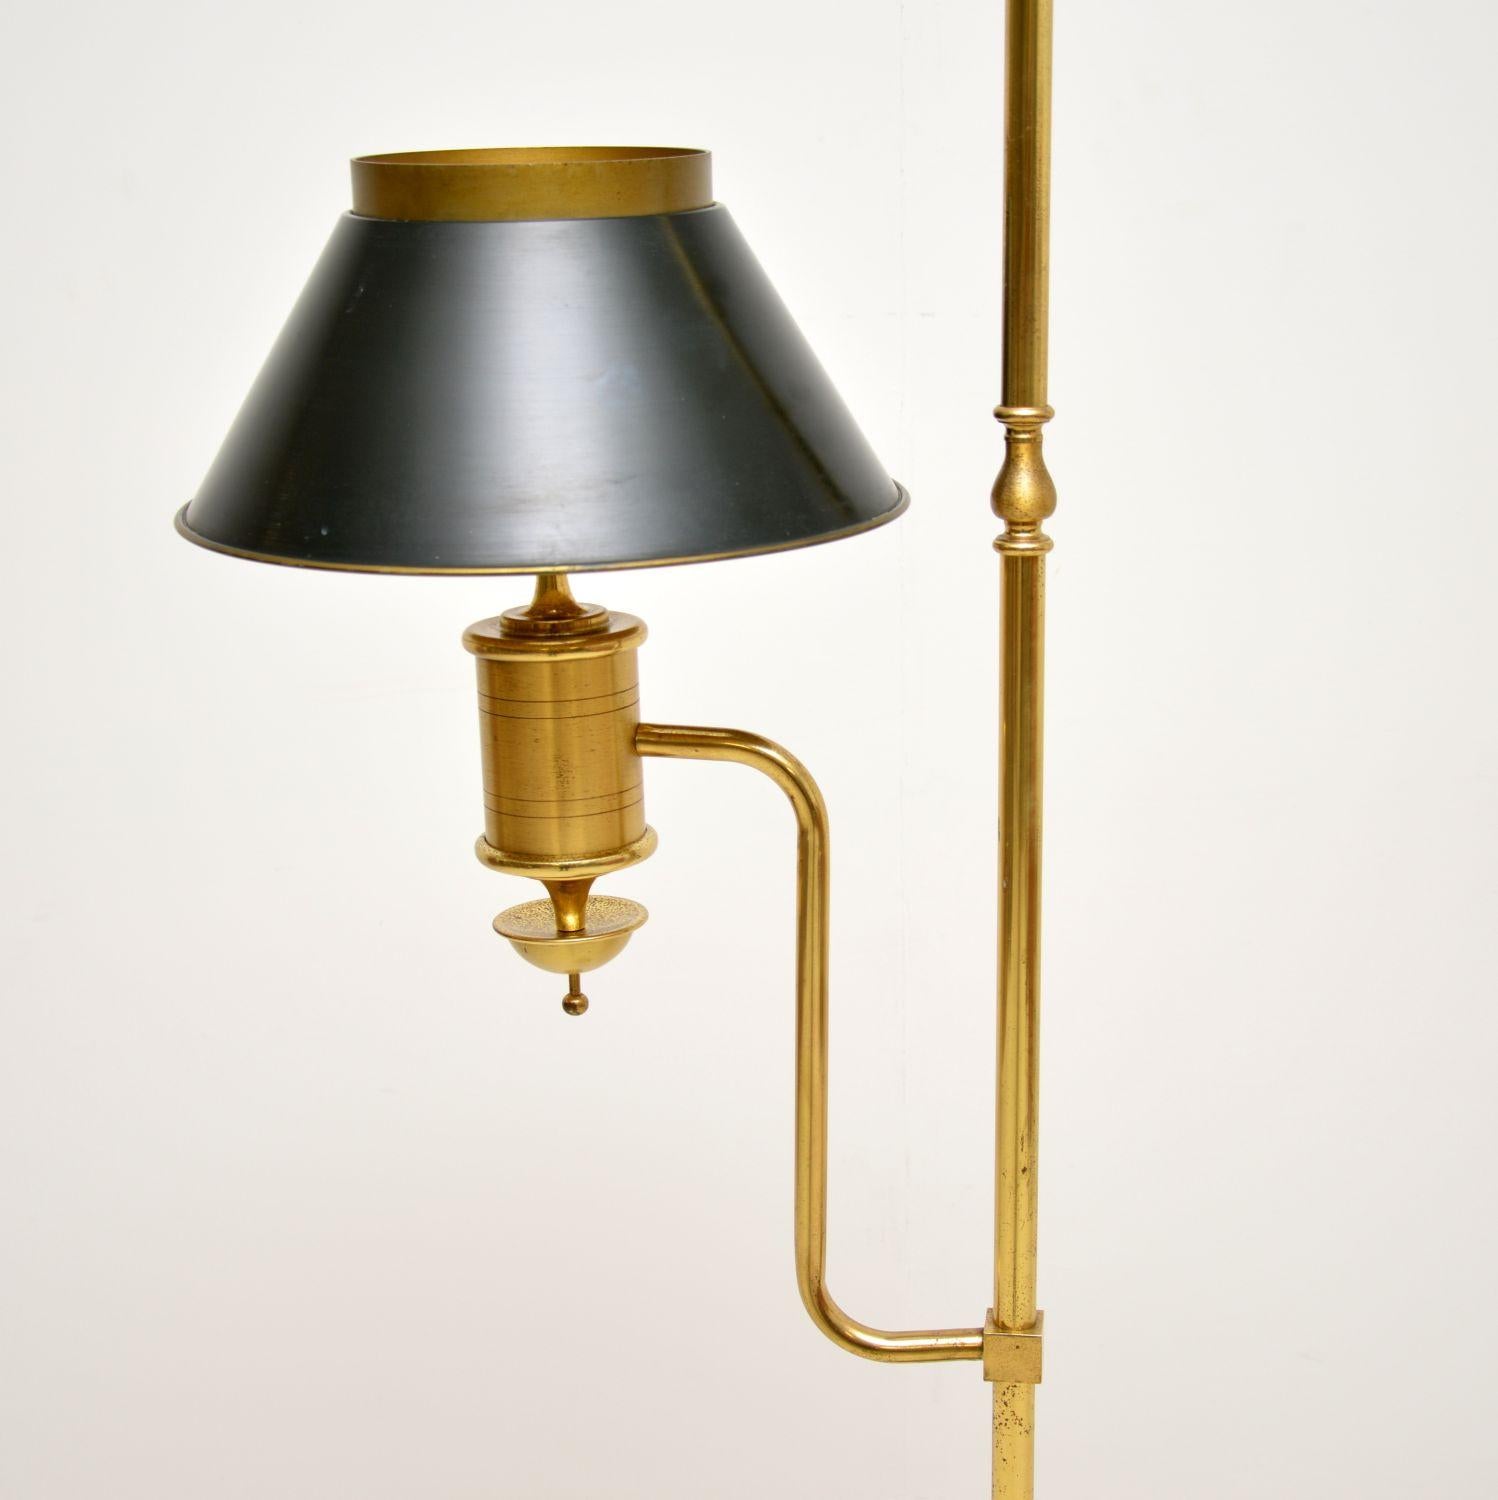 1930s Vintage Brass & Marble Floor Lamp In Good Condition For Sale In London, GB